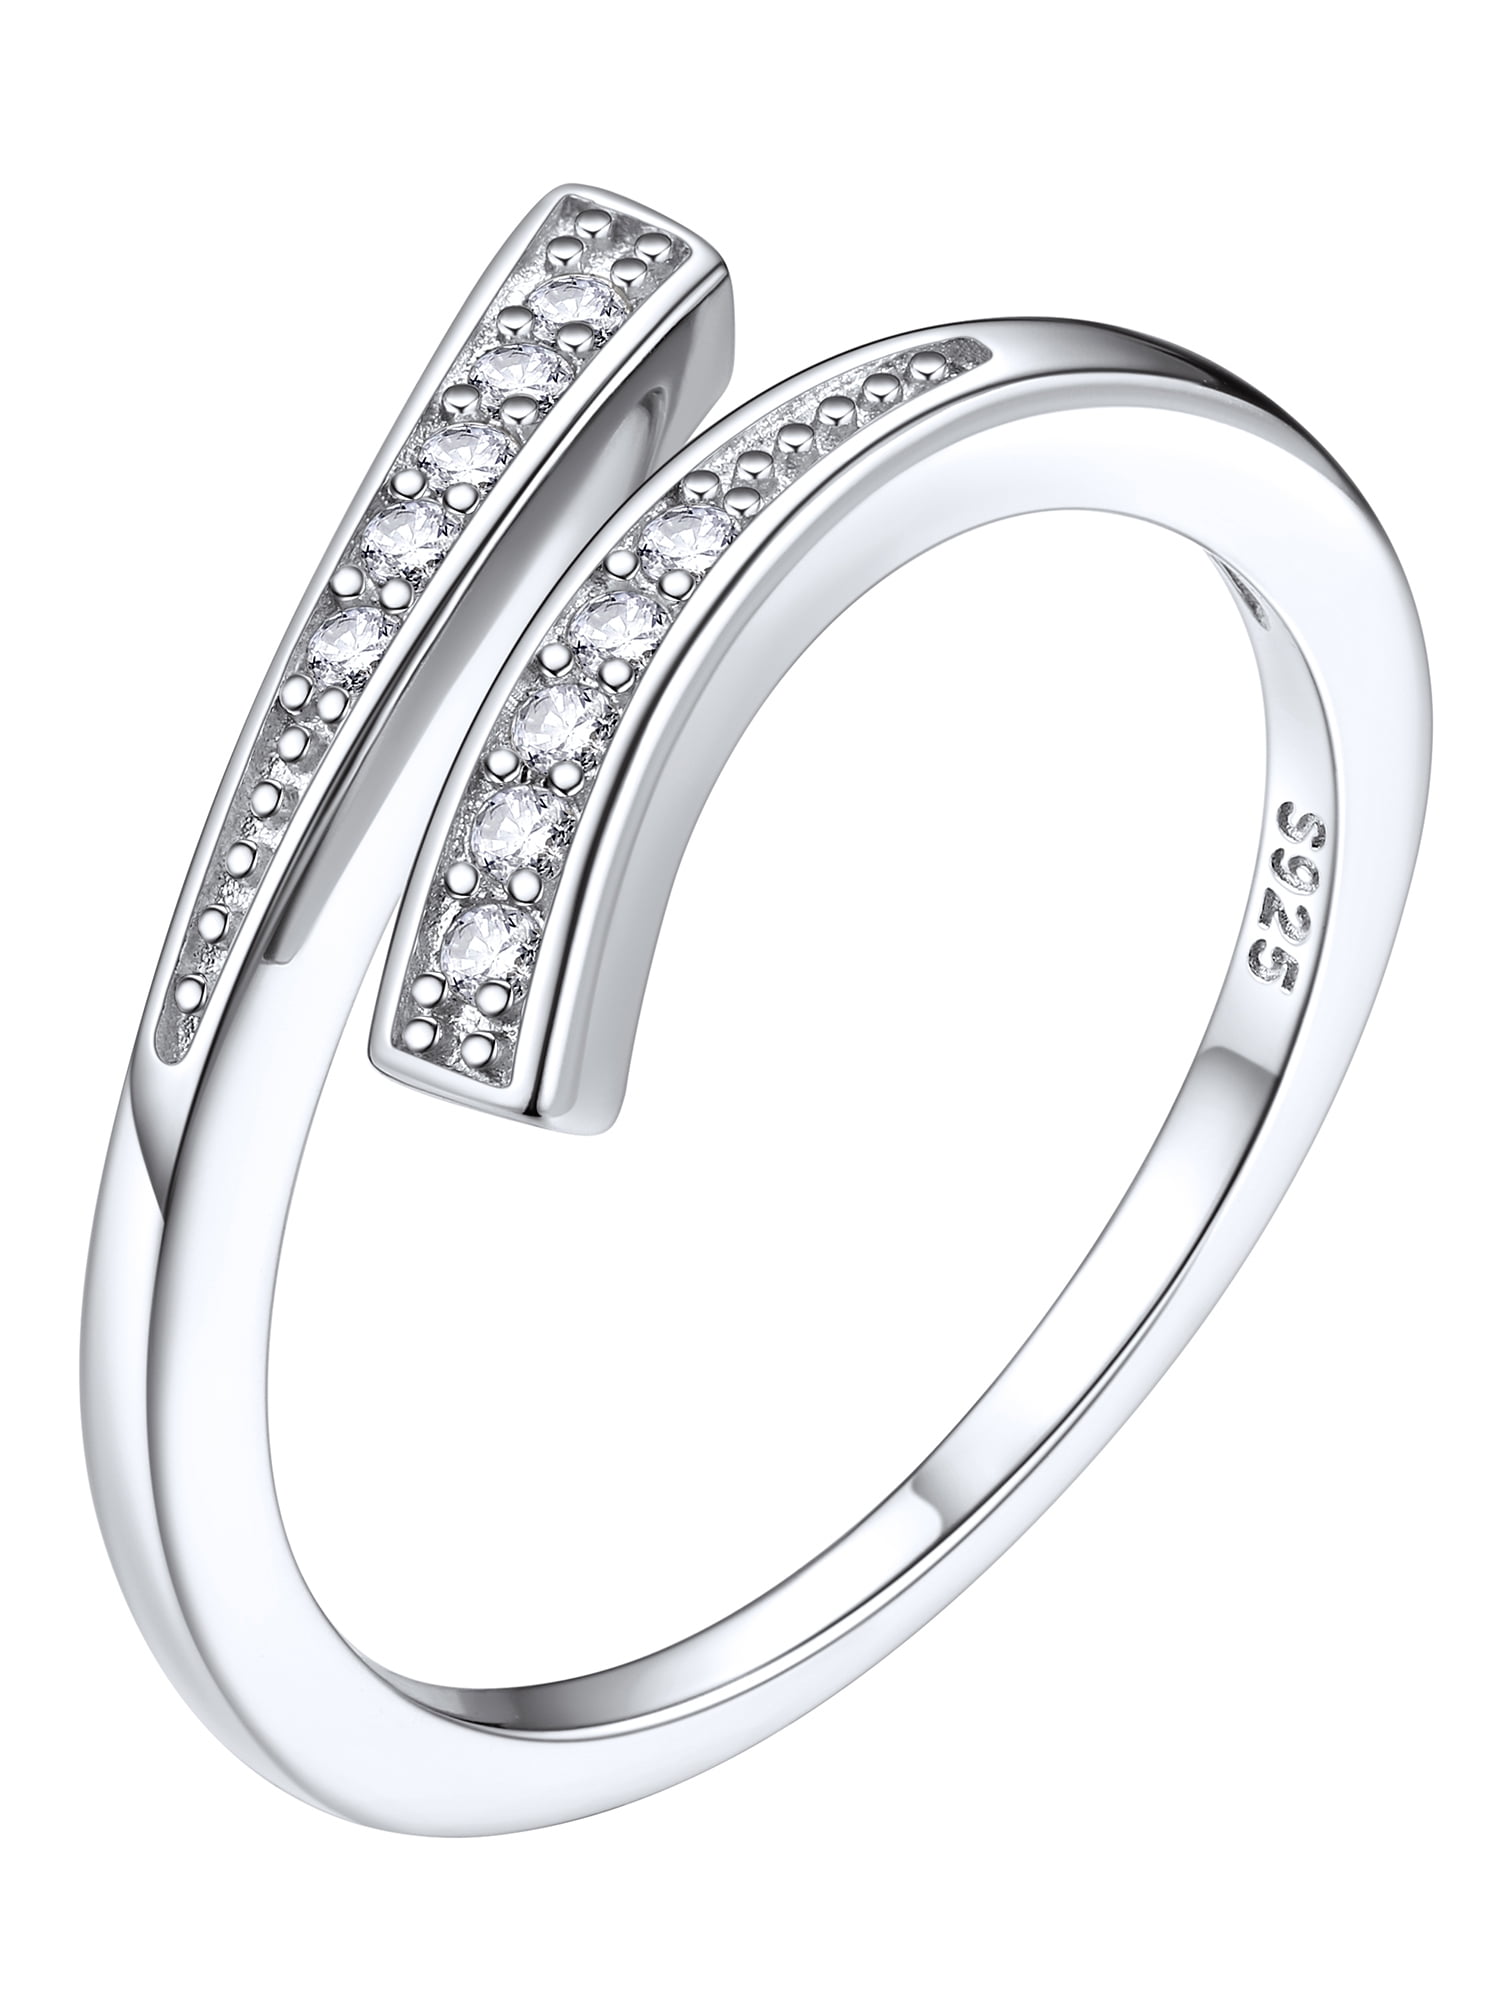 Promise Rings For Her Under 100 | Sterling silver promise rings, Jewelry,  Heart promise rings